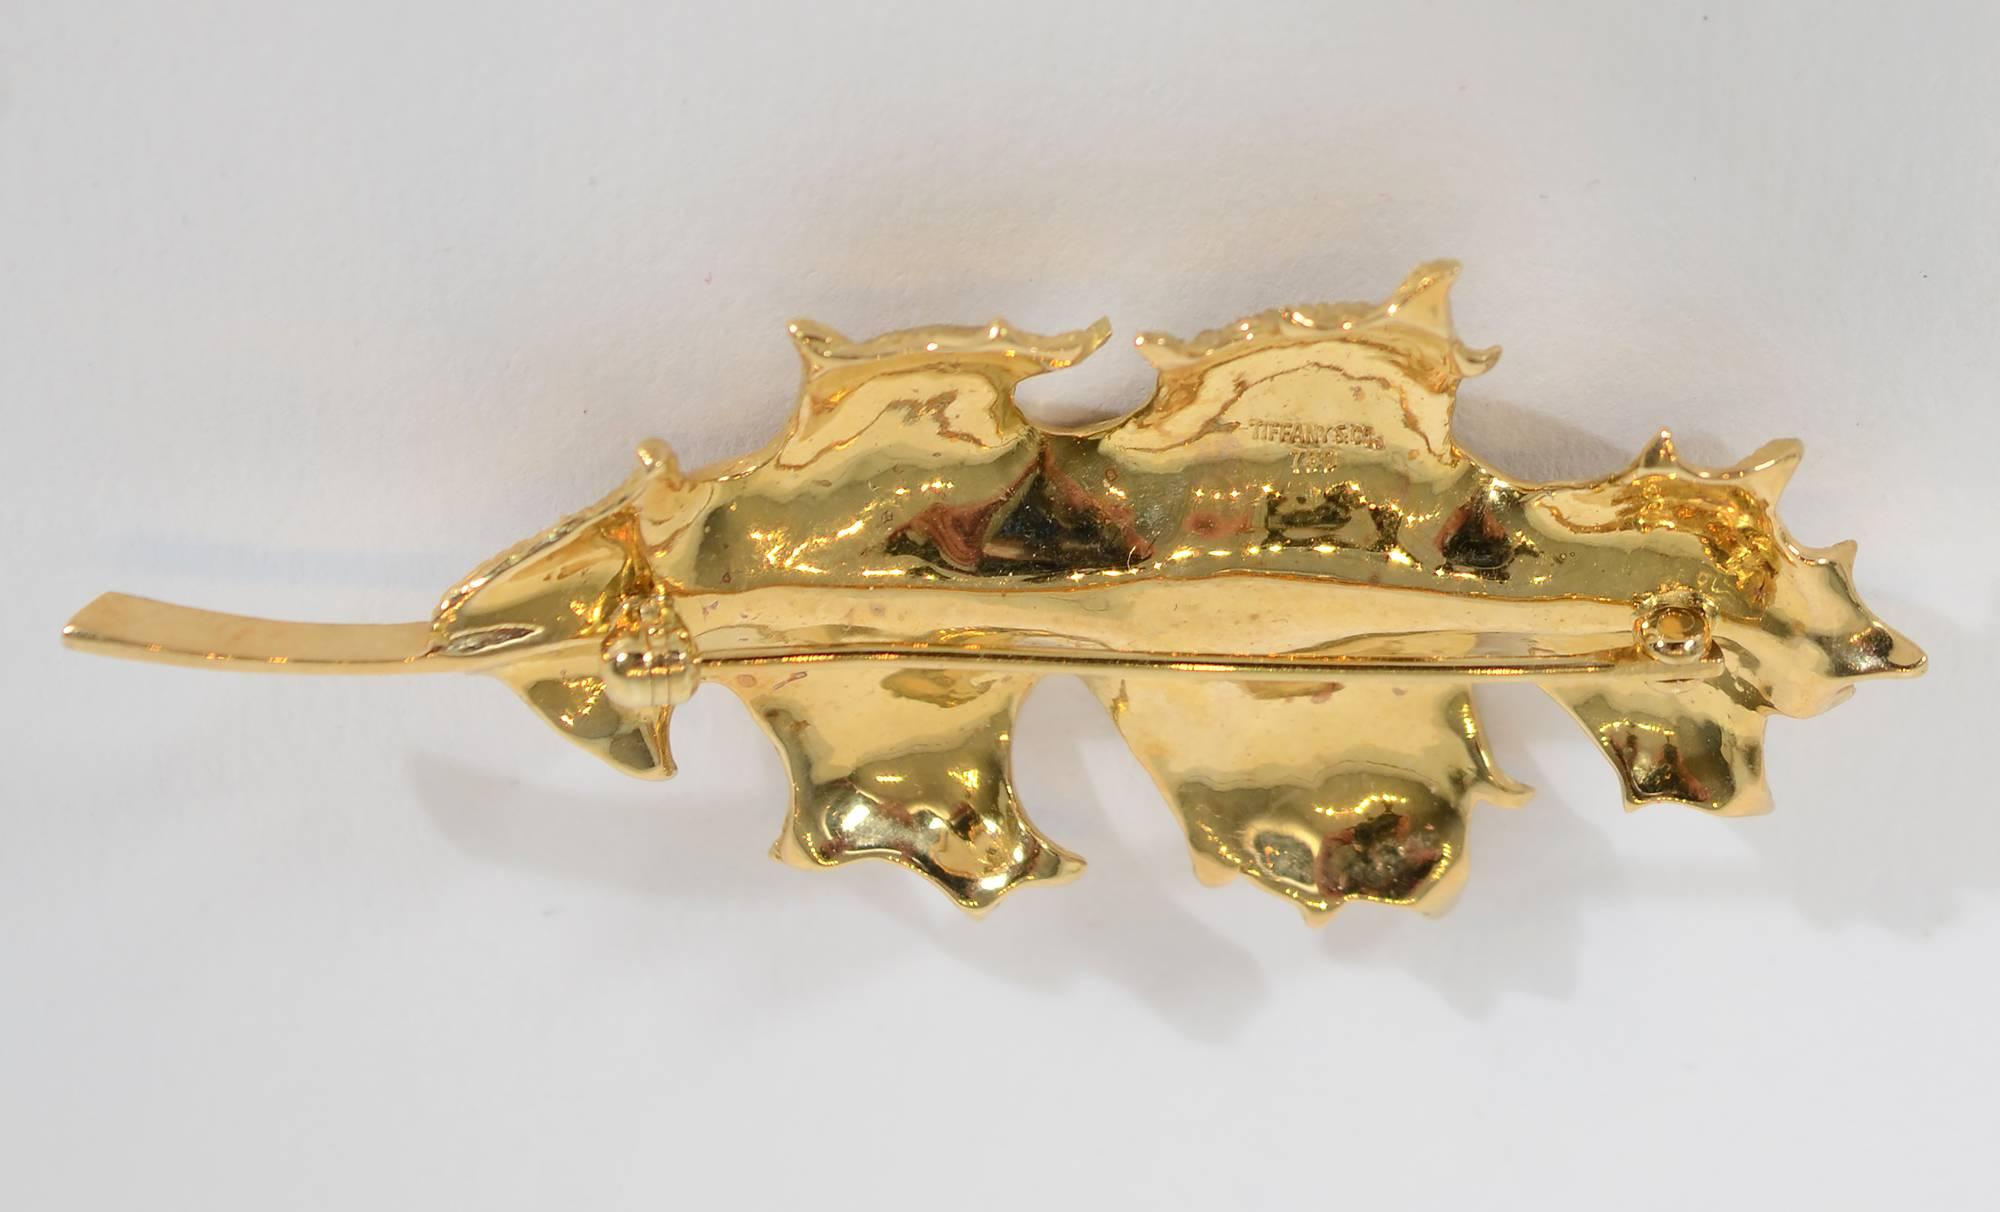 This 18 karat gold Oakleaf brooch by Tiffany conveys all the fine points of nature. The piece is beautifully detailed with veins throughout and a subtle texture. It is slightly convex with curled ends. Measurements are 2 7/16